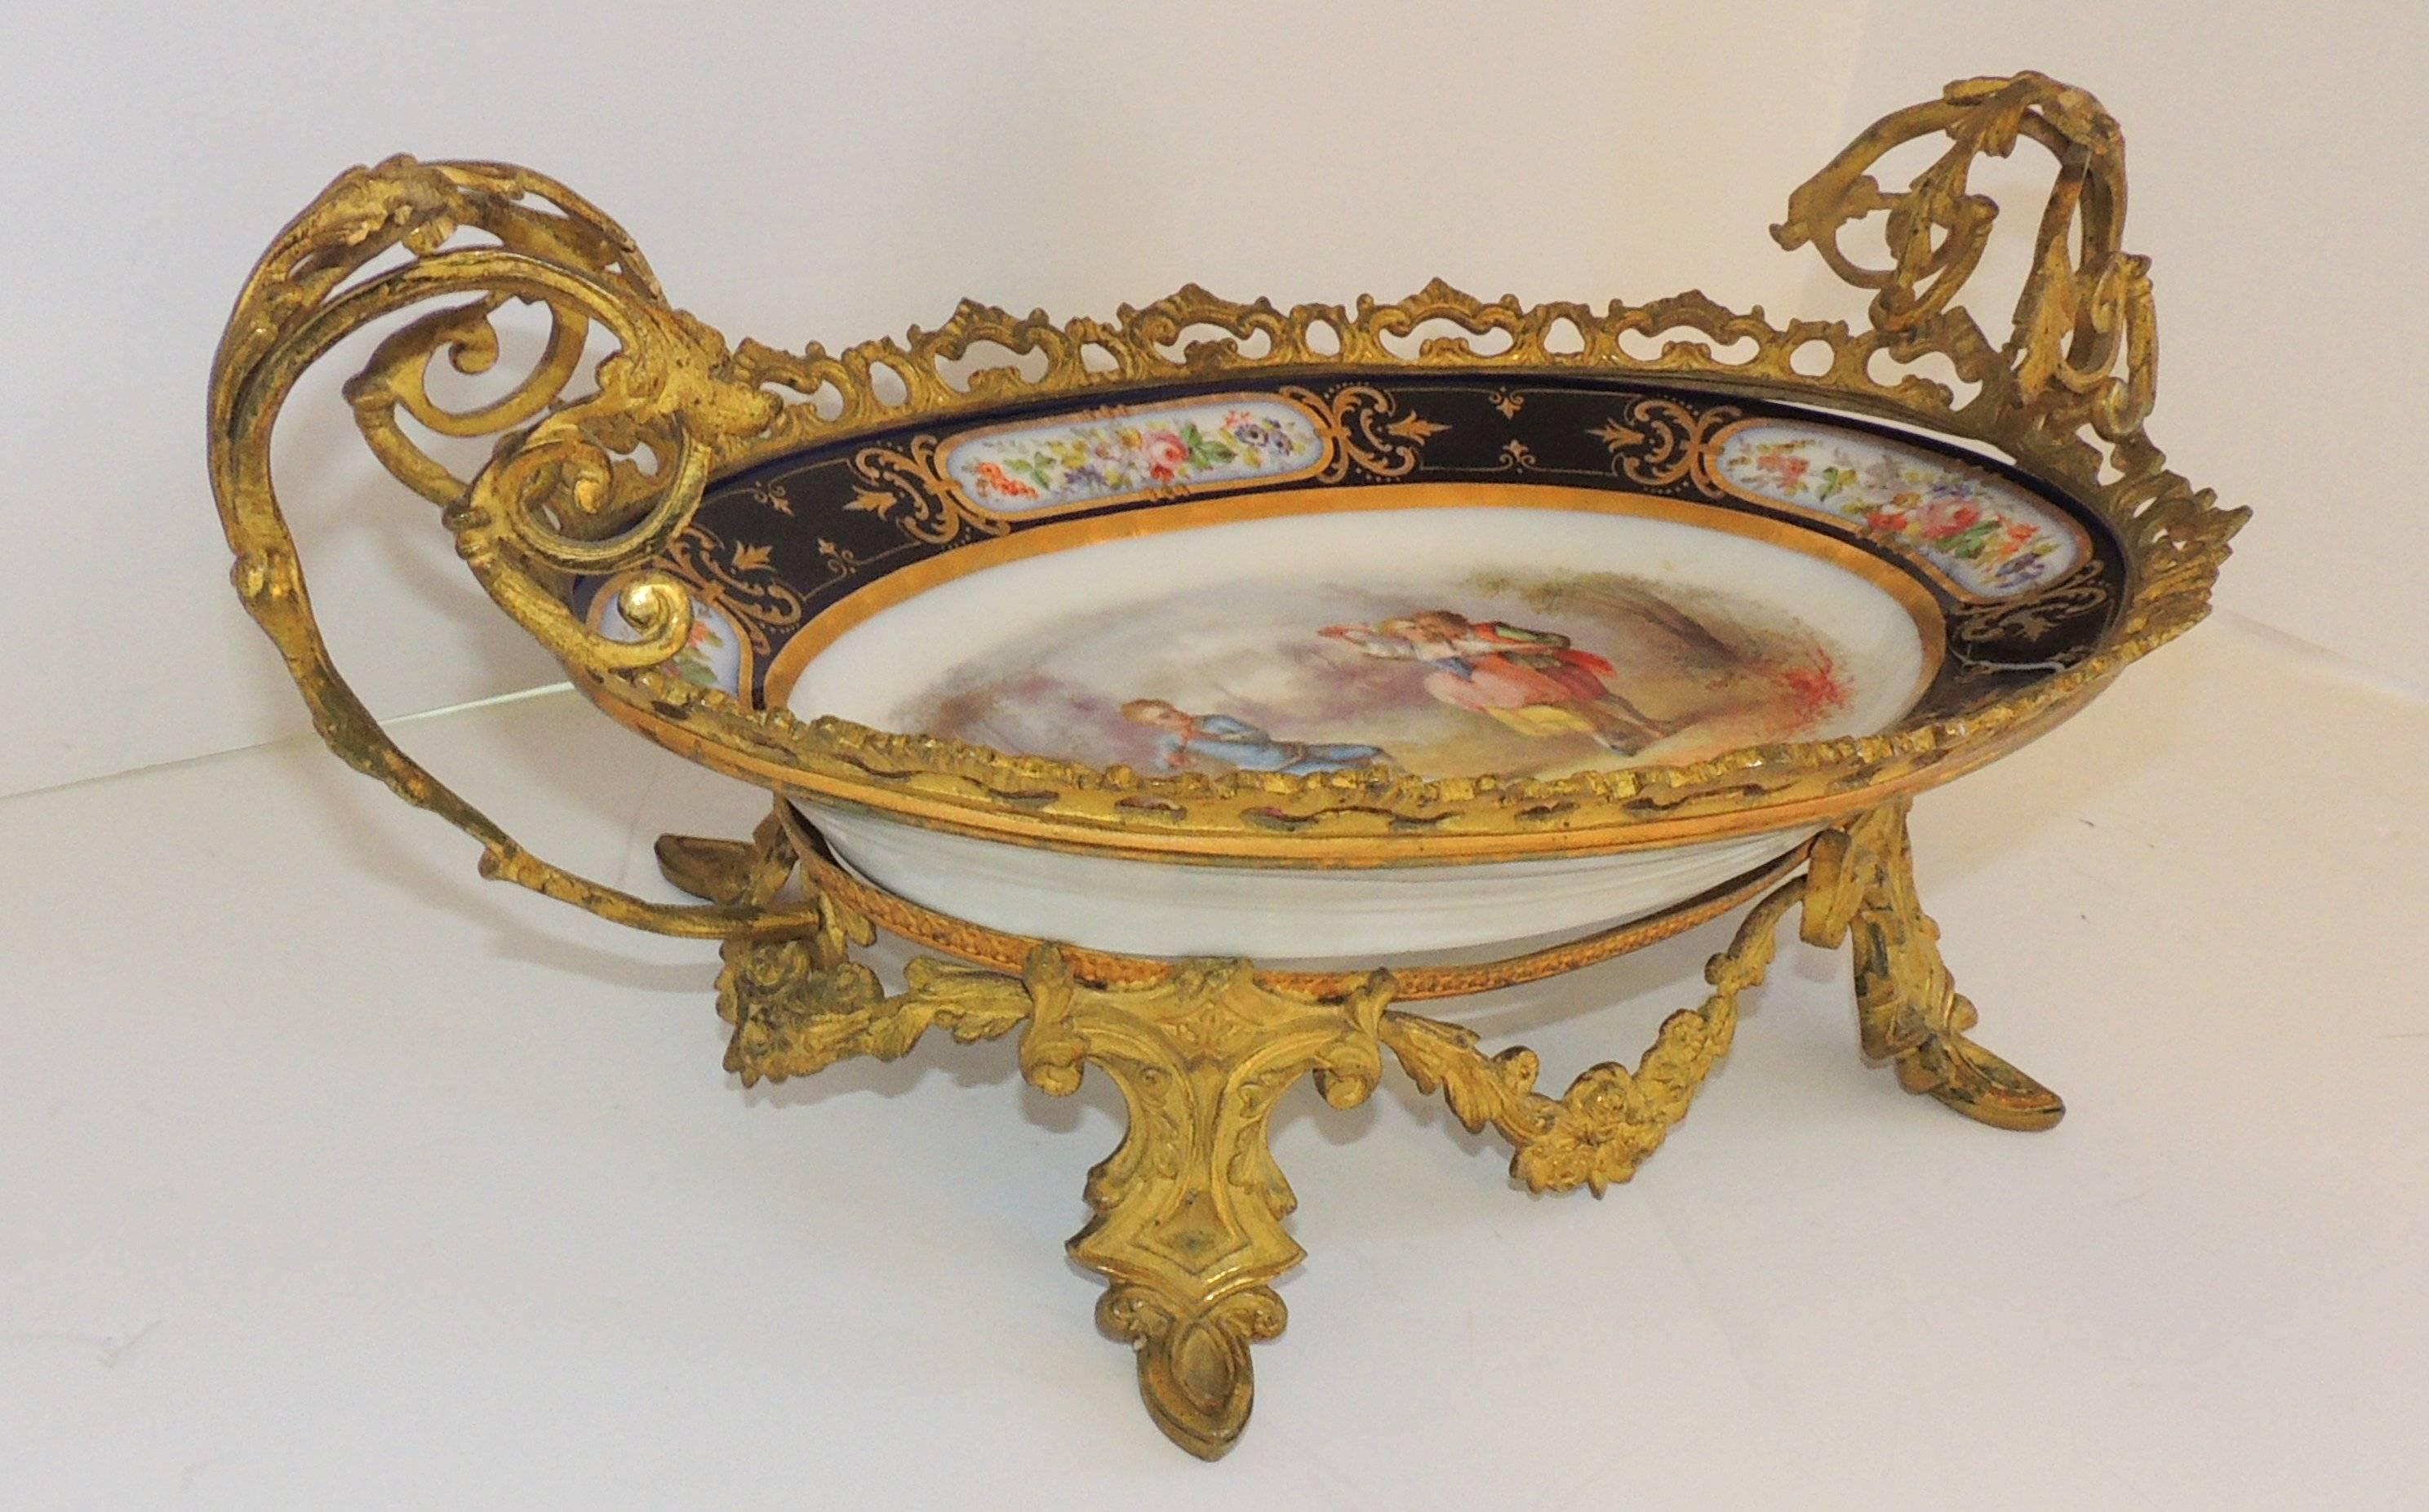 Wonderful French Ormolu Bronze Sevres Hand-Painted Porcelain Centerpiece Tray For Sale 2